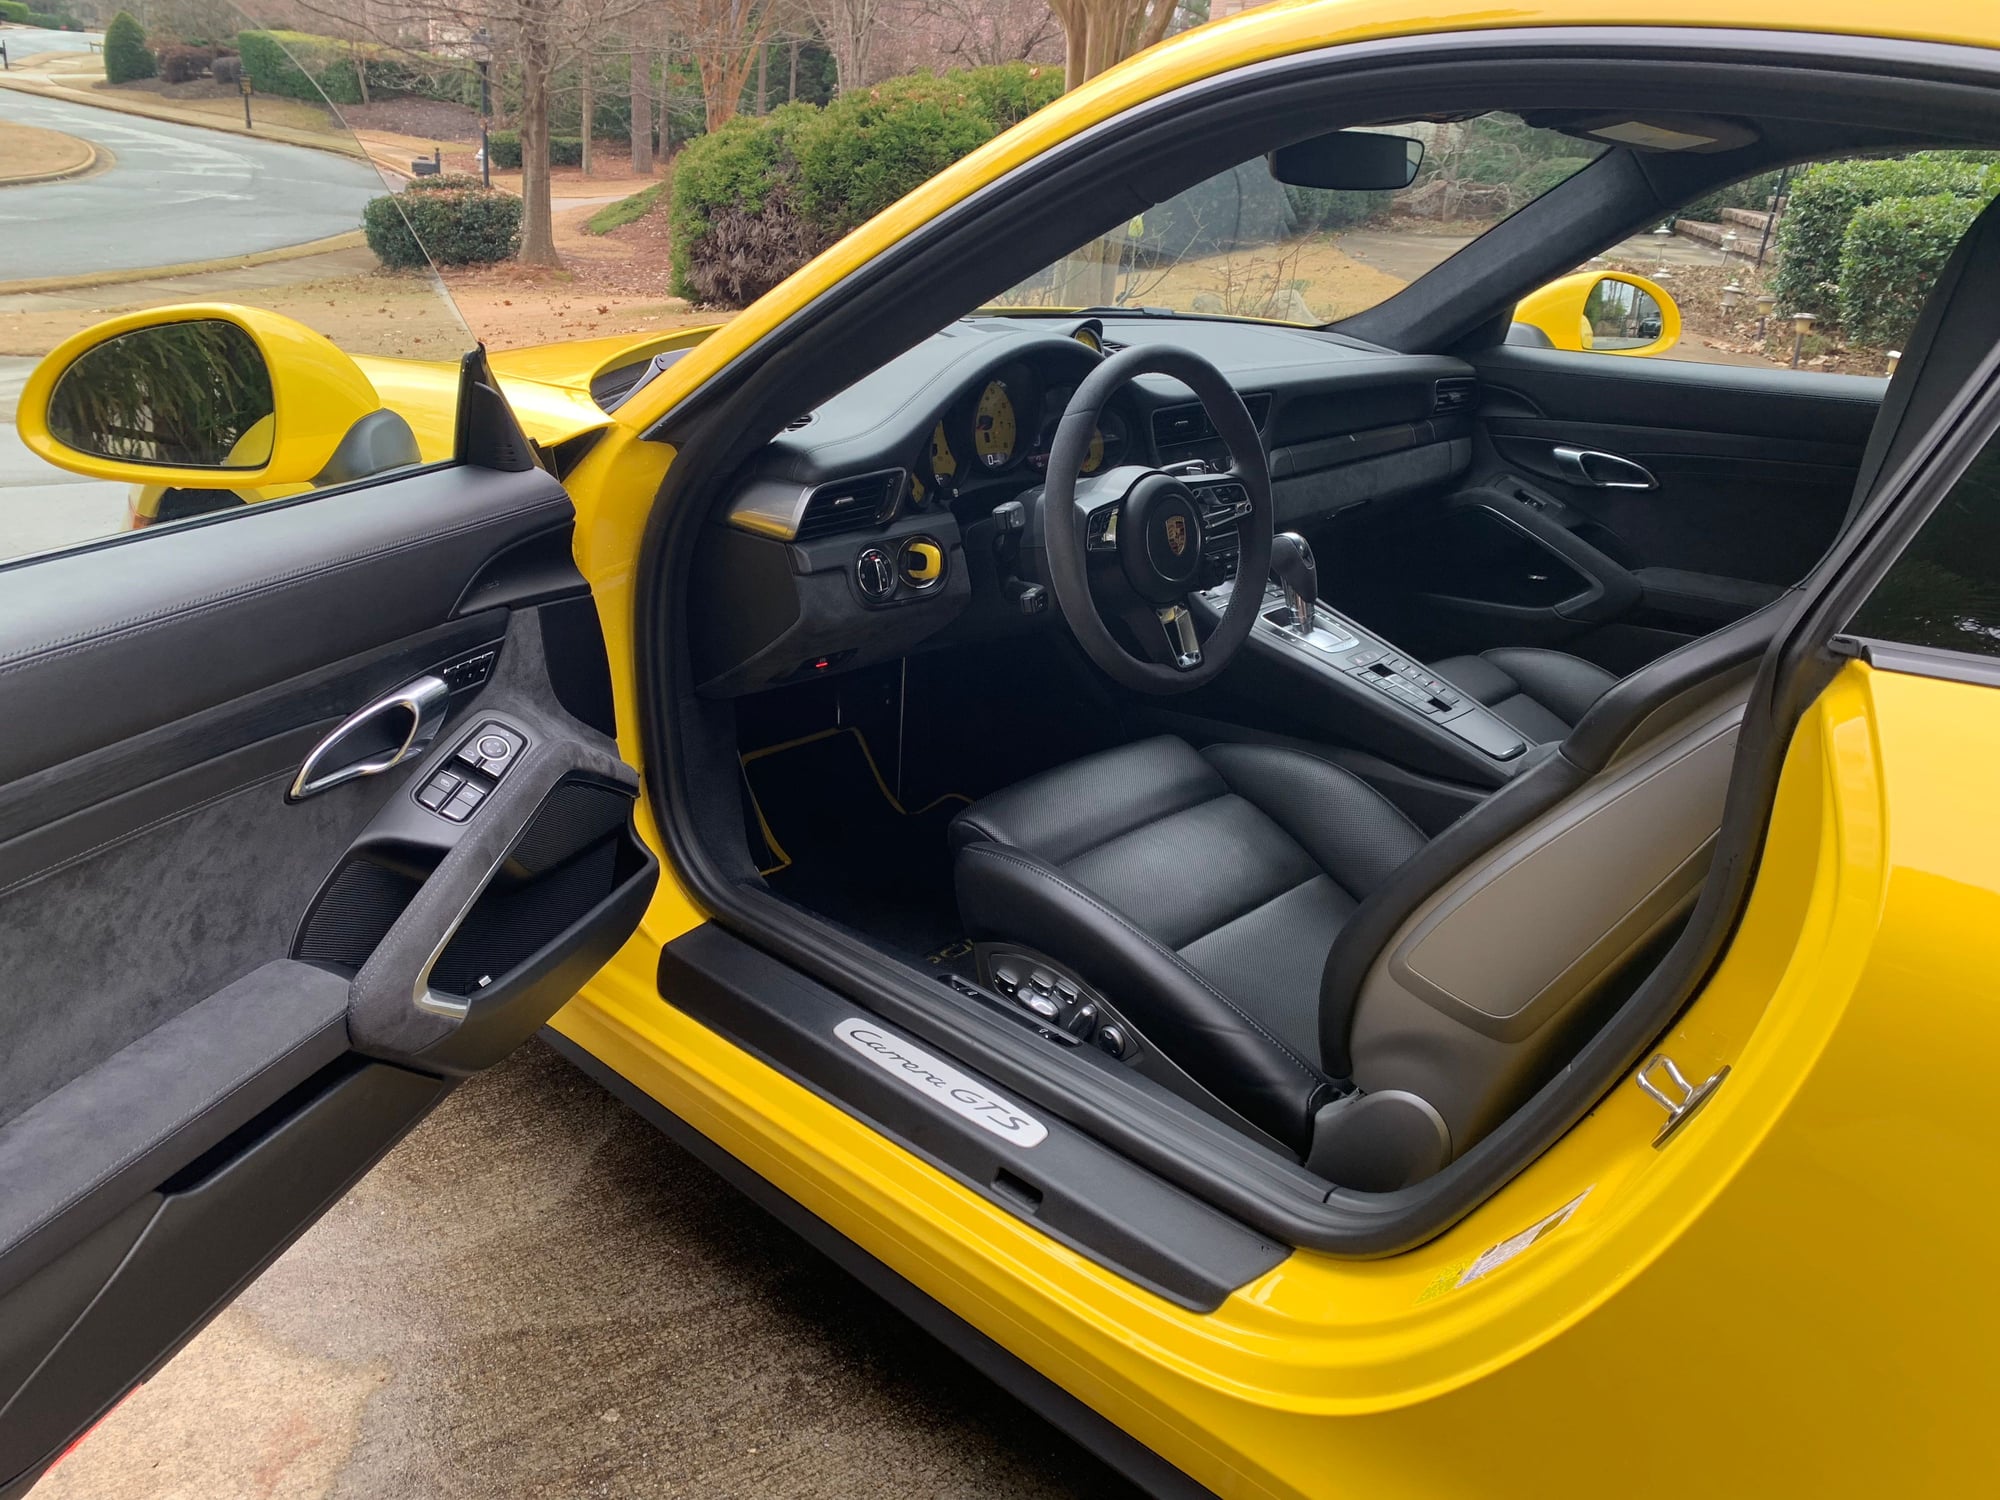 2017 Porsche 911 - Fully Loaded 2017 911 GTS Coupe Original MSRP: $158,585 - Used - VIN WP0AB2A90HS125054 - 7,800 Miles - 6 cyl - 2WD - Automatic - Coupe - Yellow - Duluth, GA 30097, United States